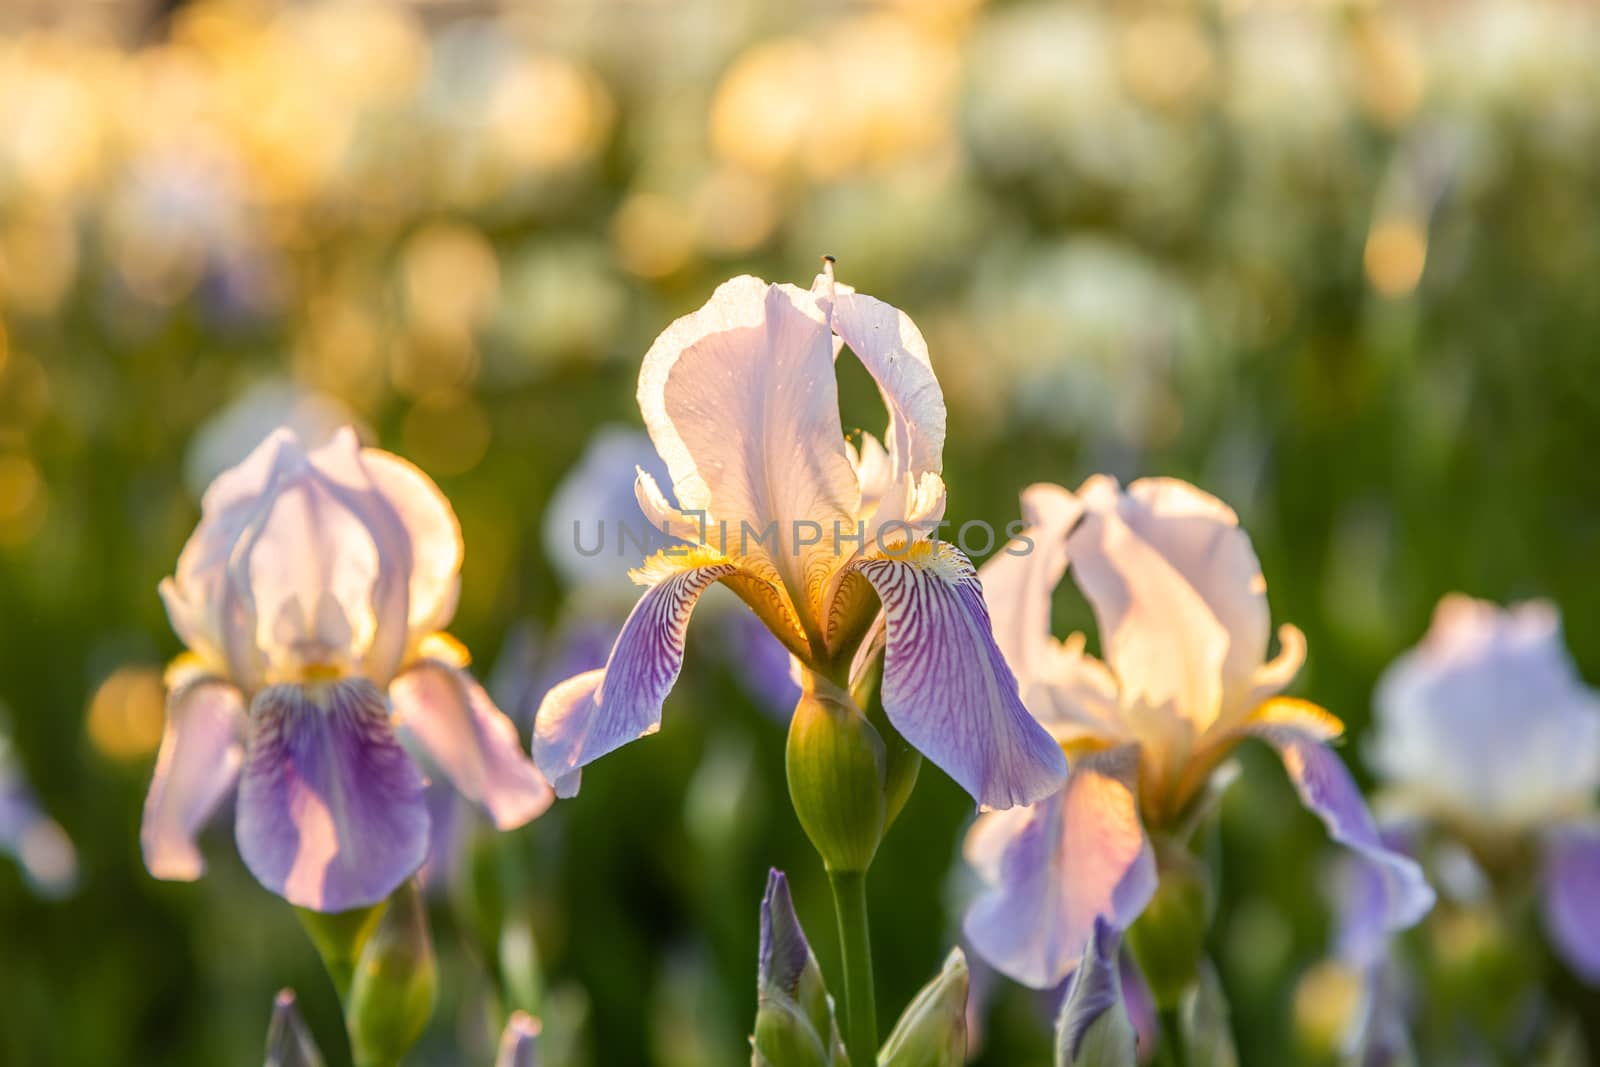 A lot of lilac irises flowers on the field in the sunlight